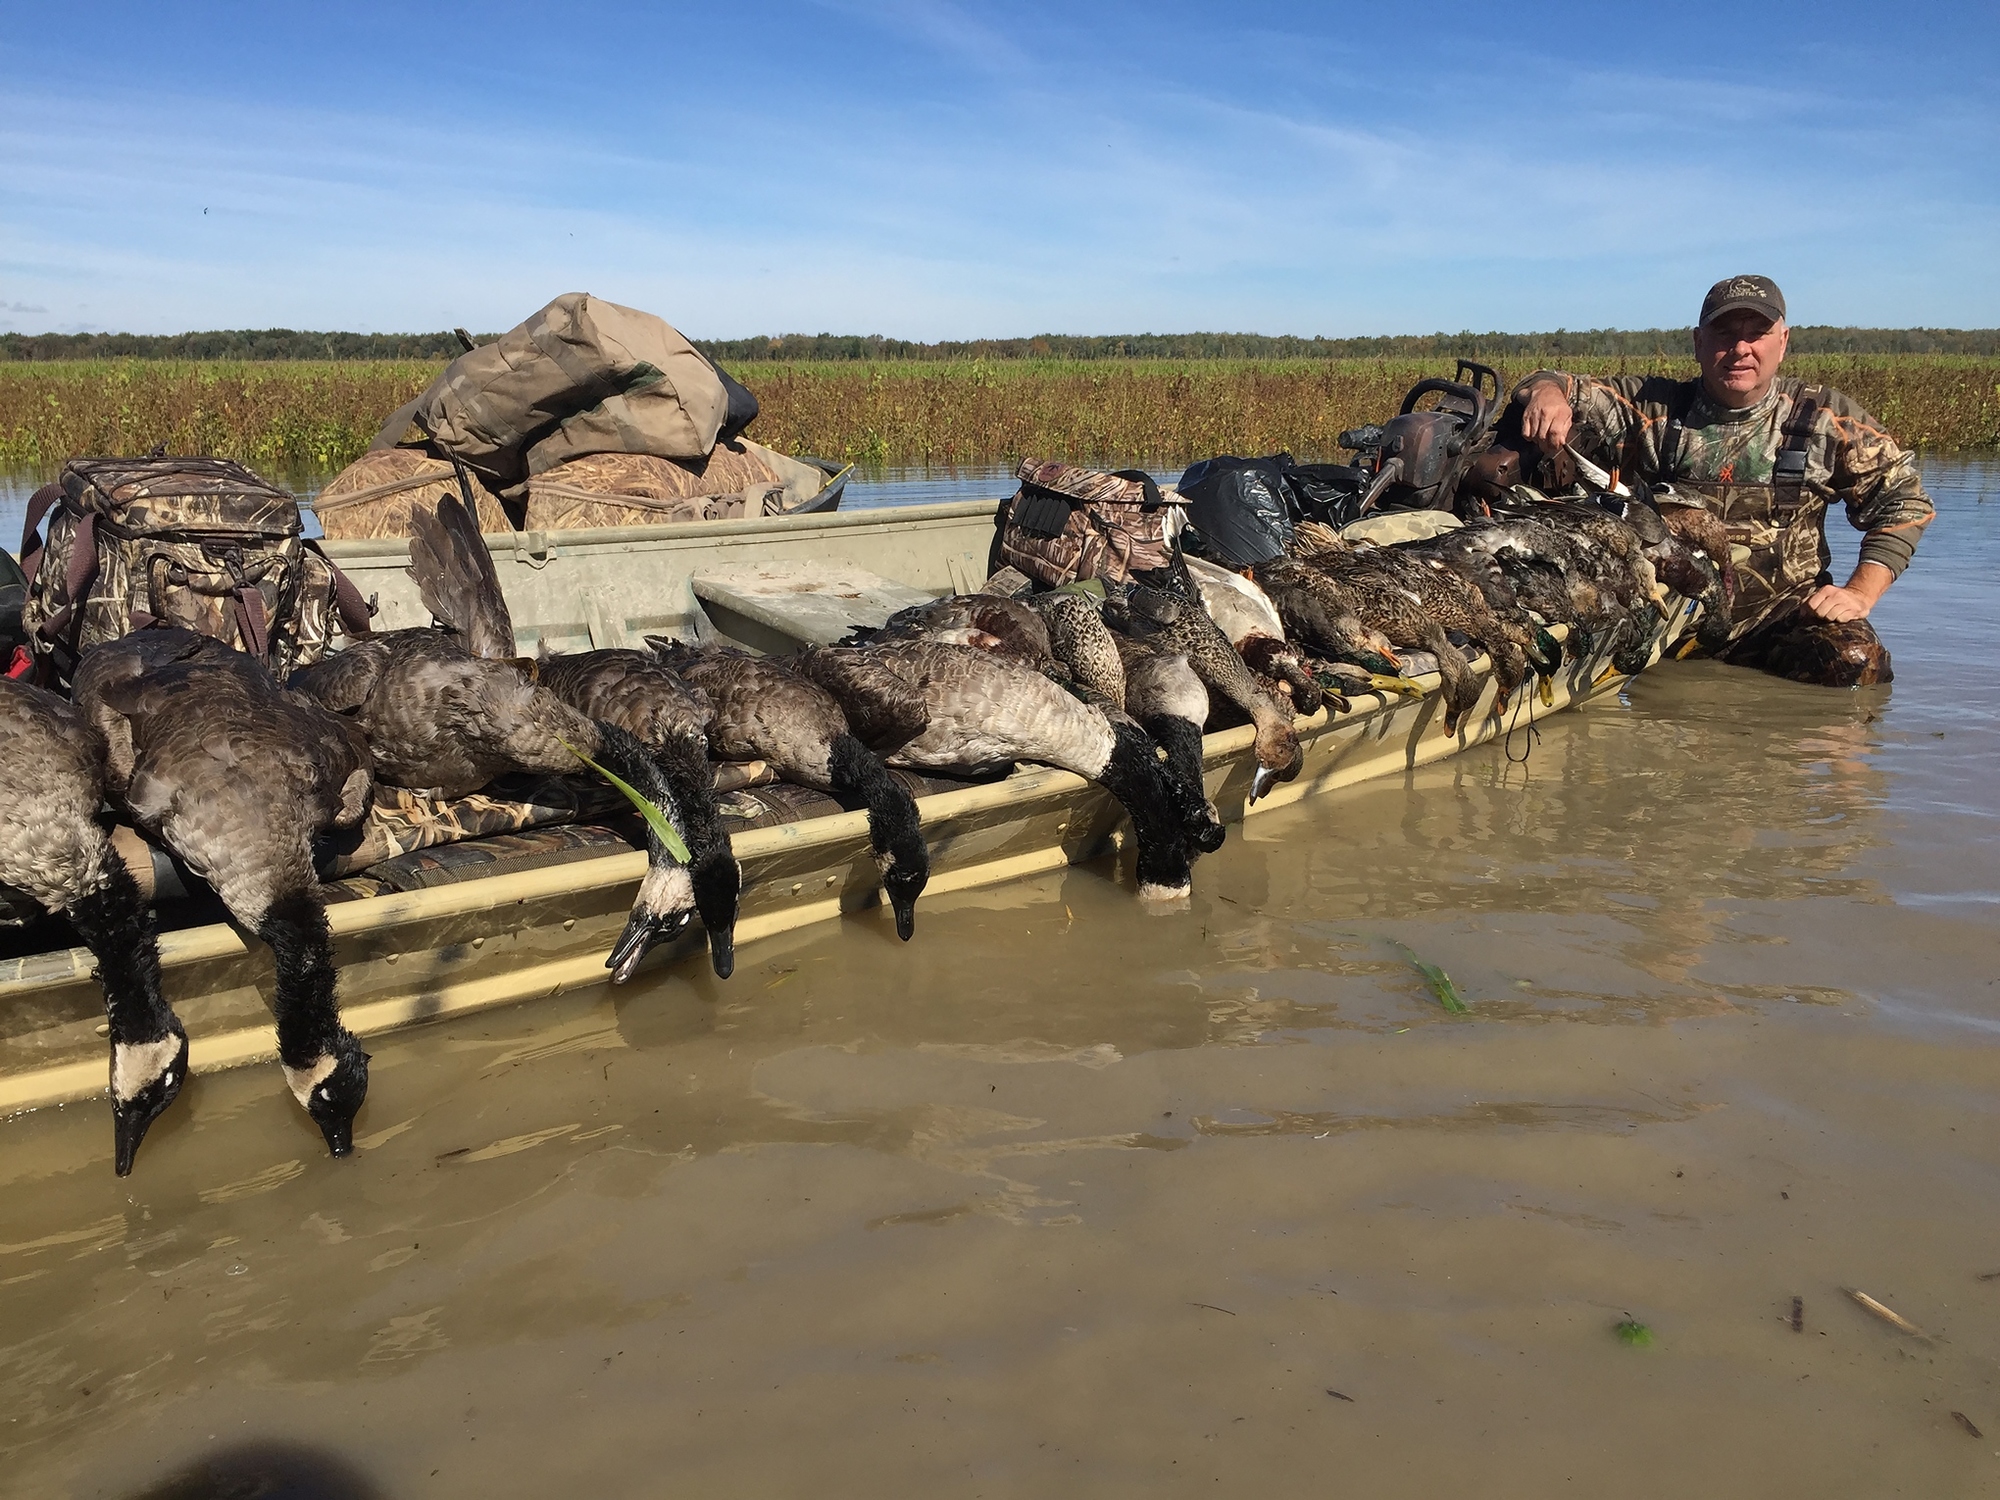 Pure Michigan Hunt 2015 winner Jason Eurich of Saginaw with geese and ducks he bagged.